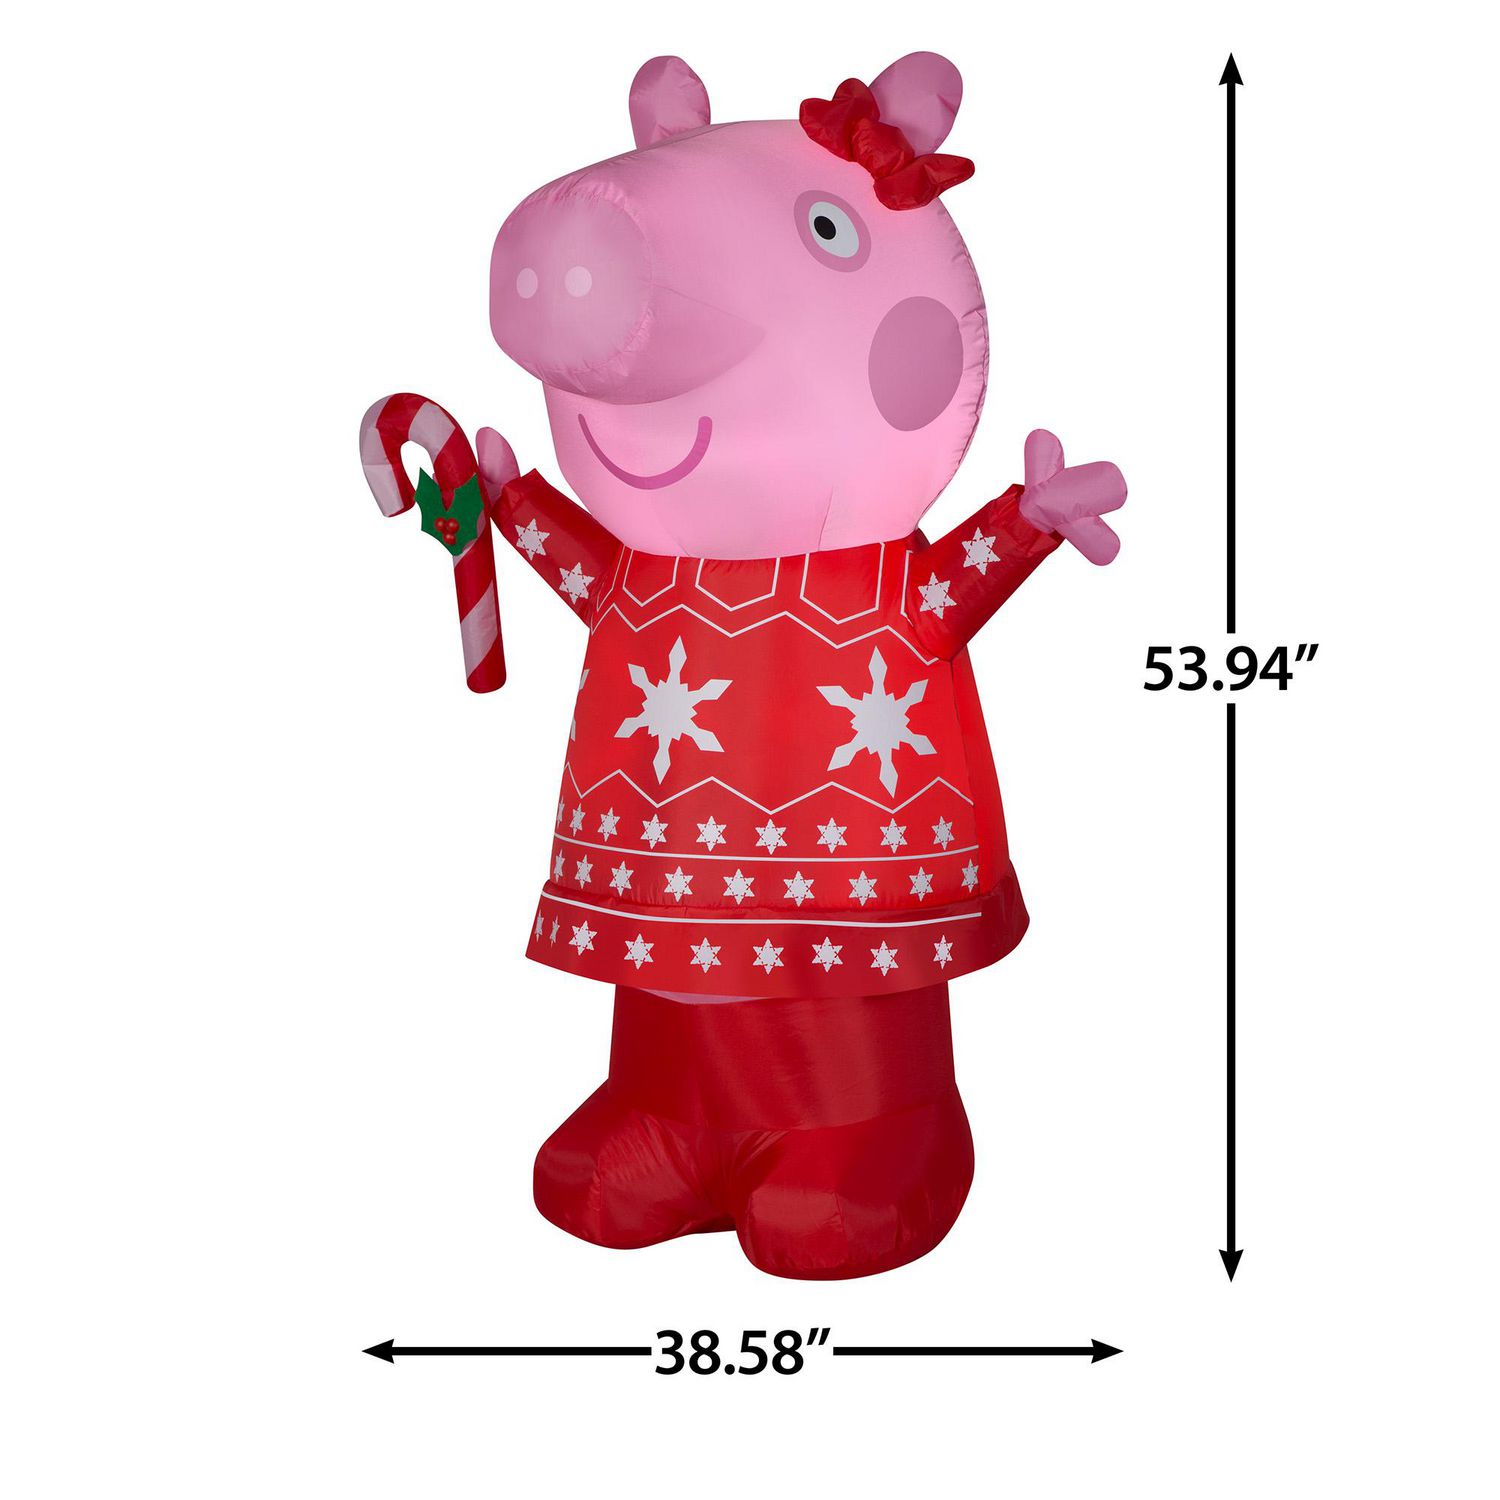 Kids Children Free Standing Inflatable Peppa Pig Party Fun Blow Up Toy